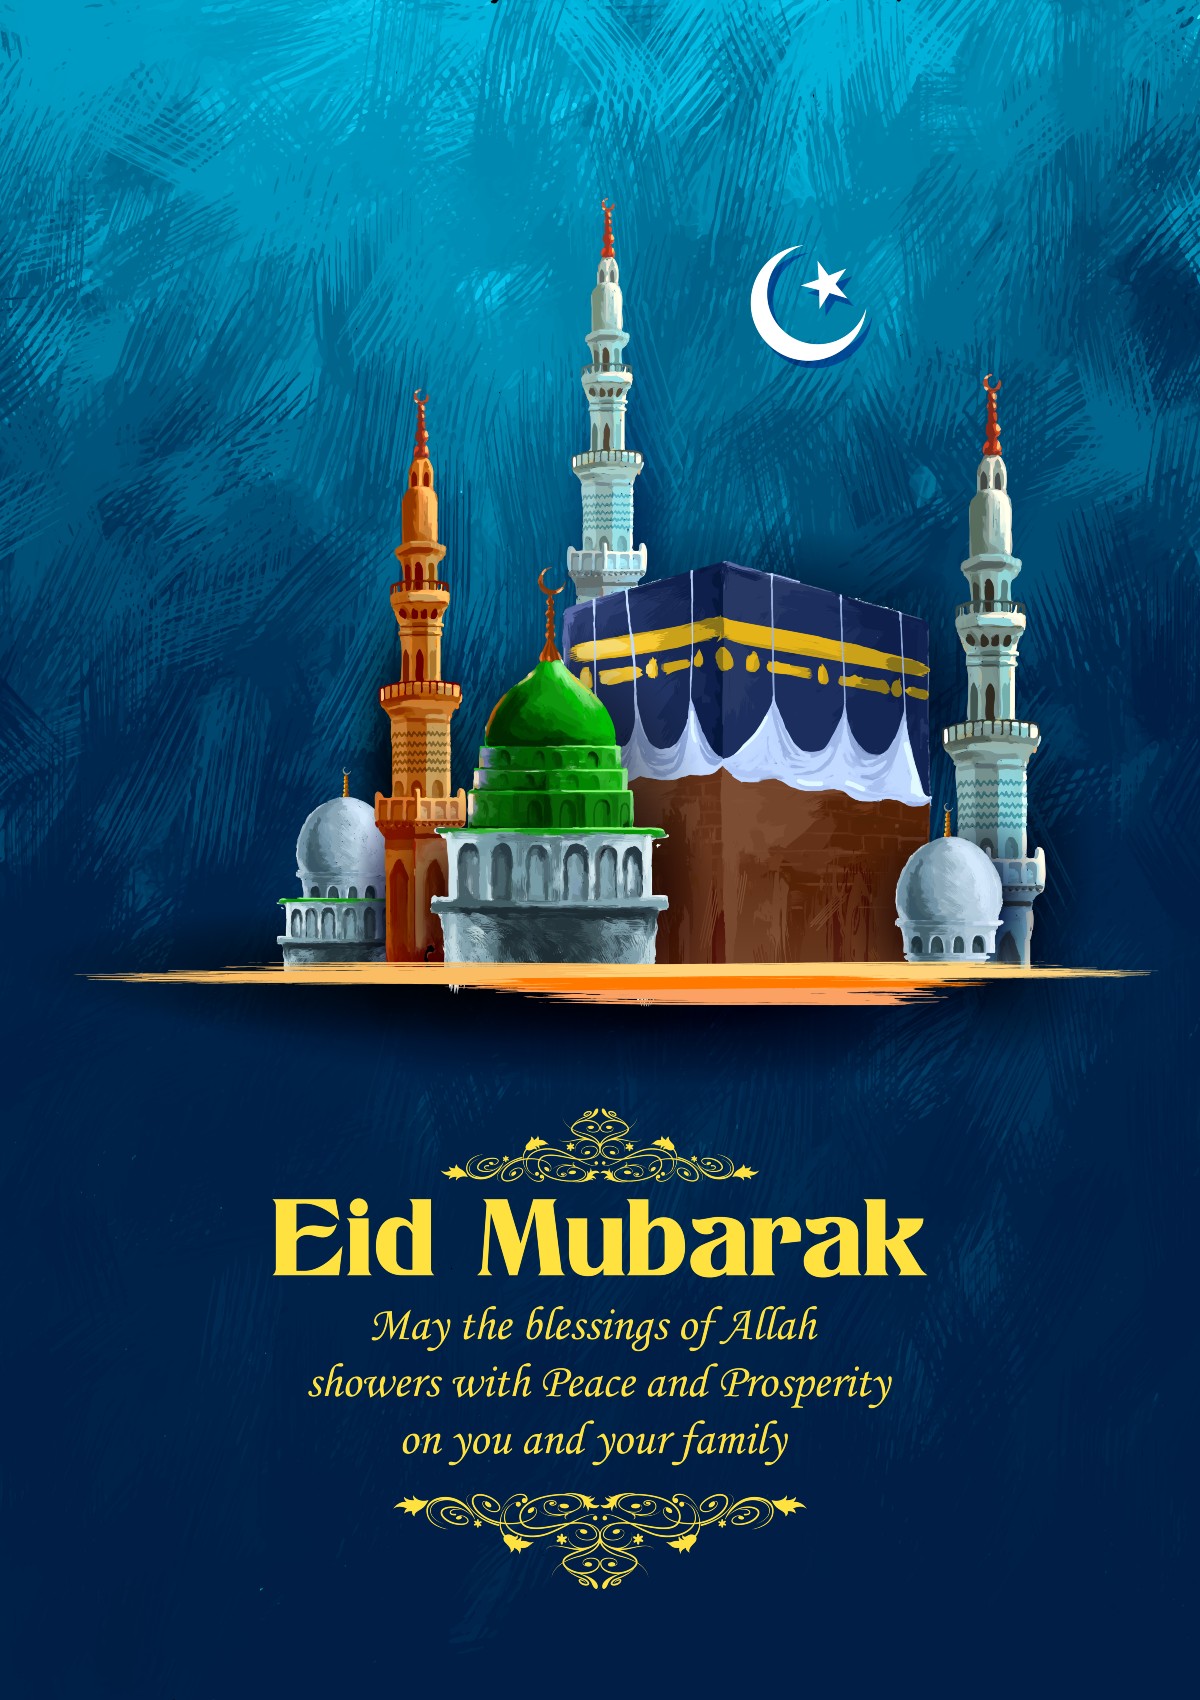 Bakrid Mubarak Images, Wishes, Quotes and Messages to Share Amid COVID